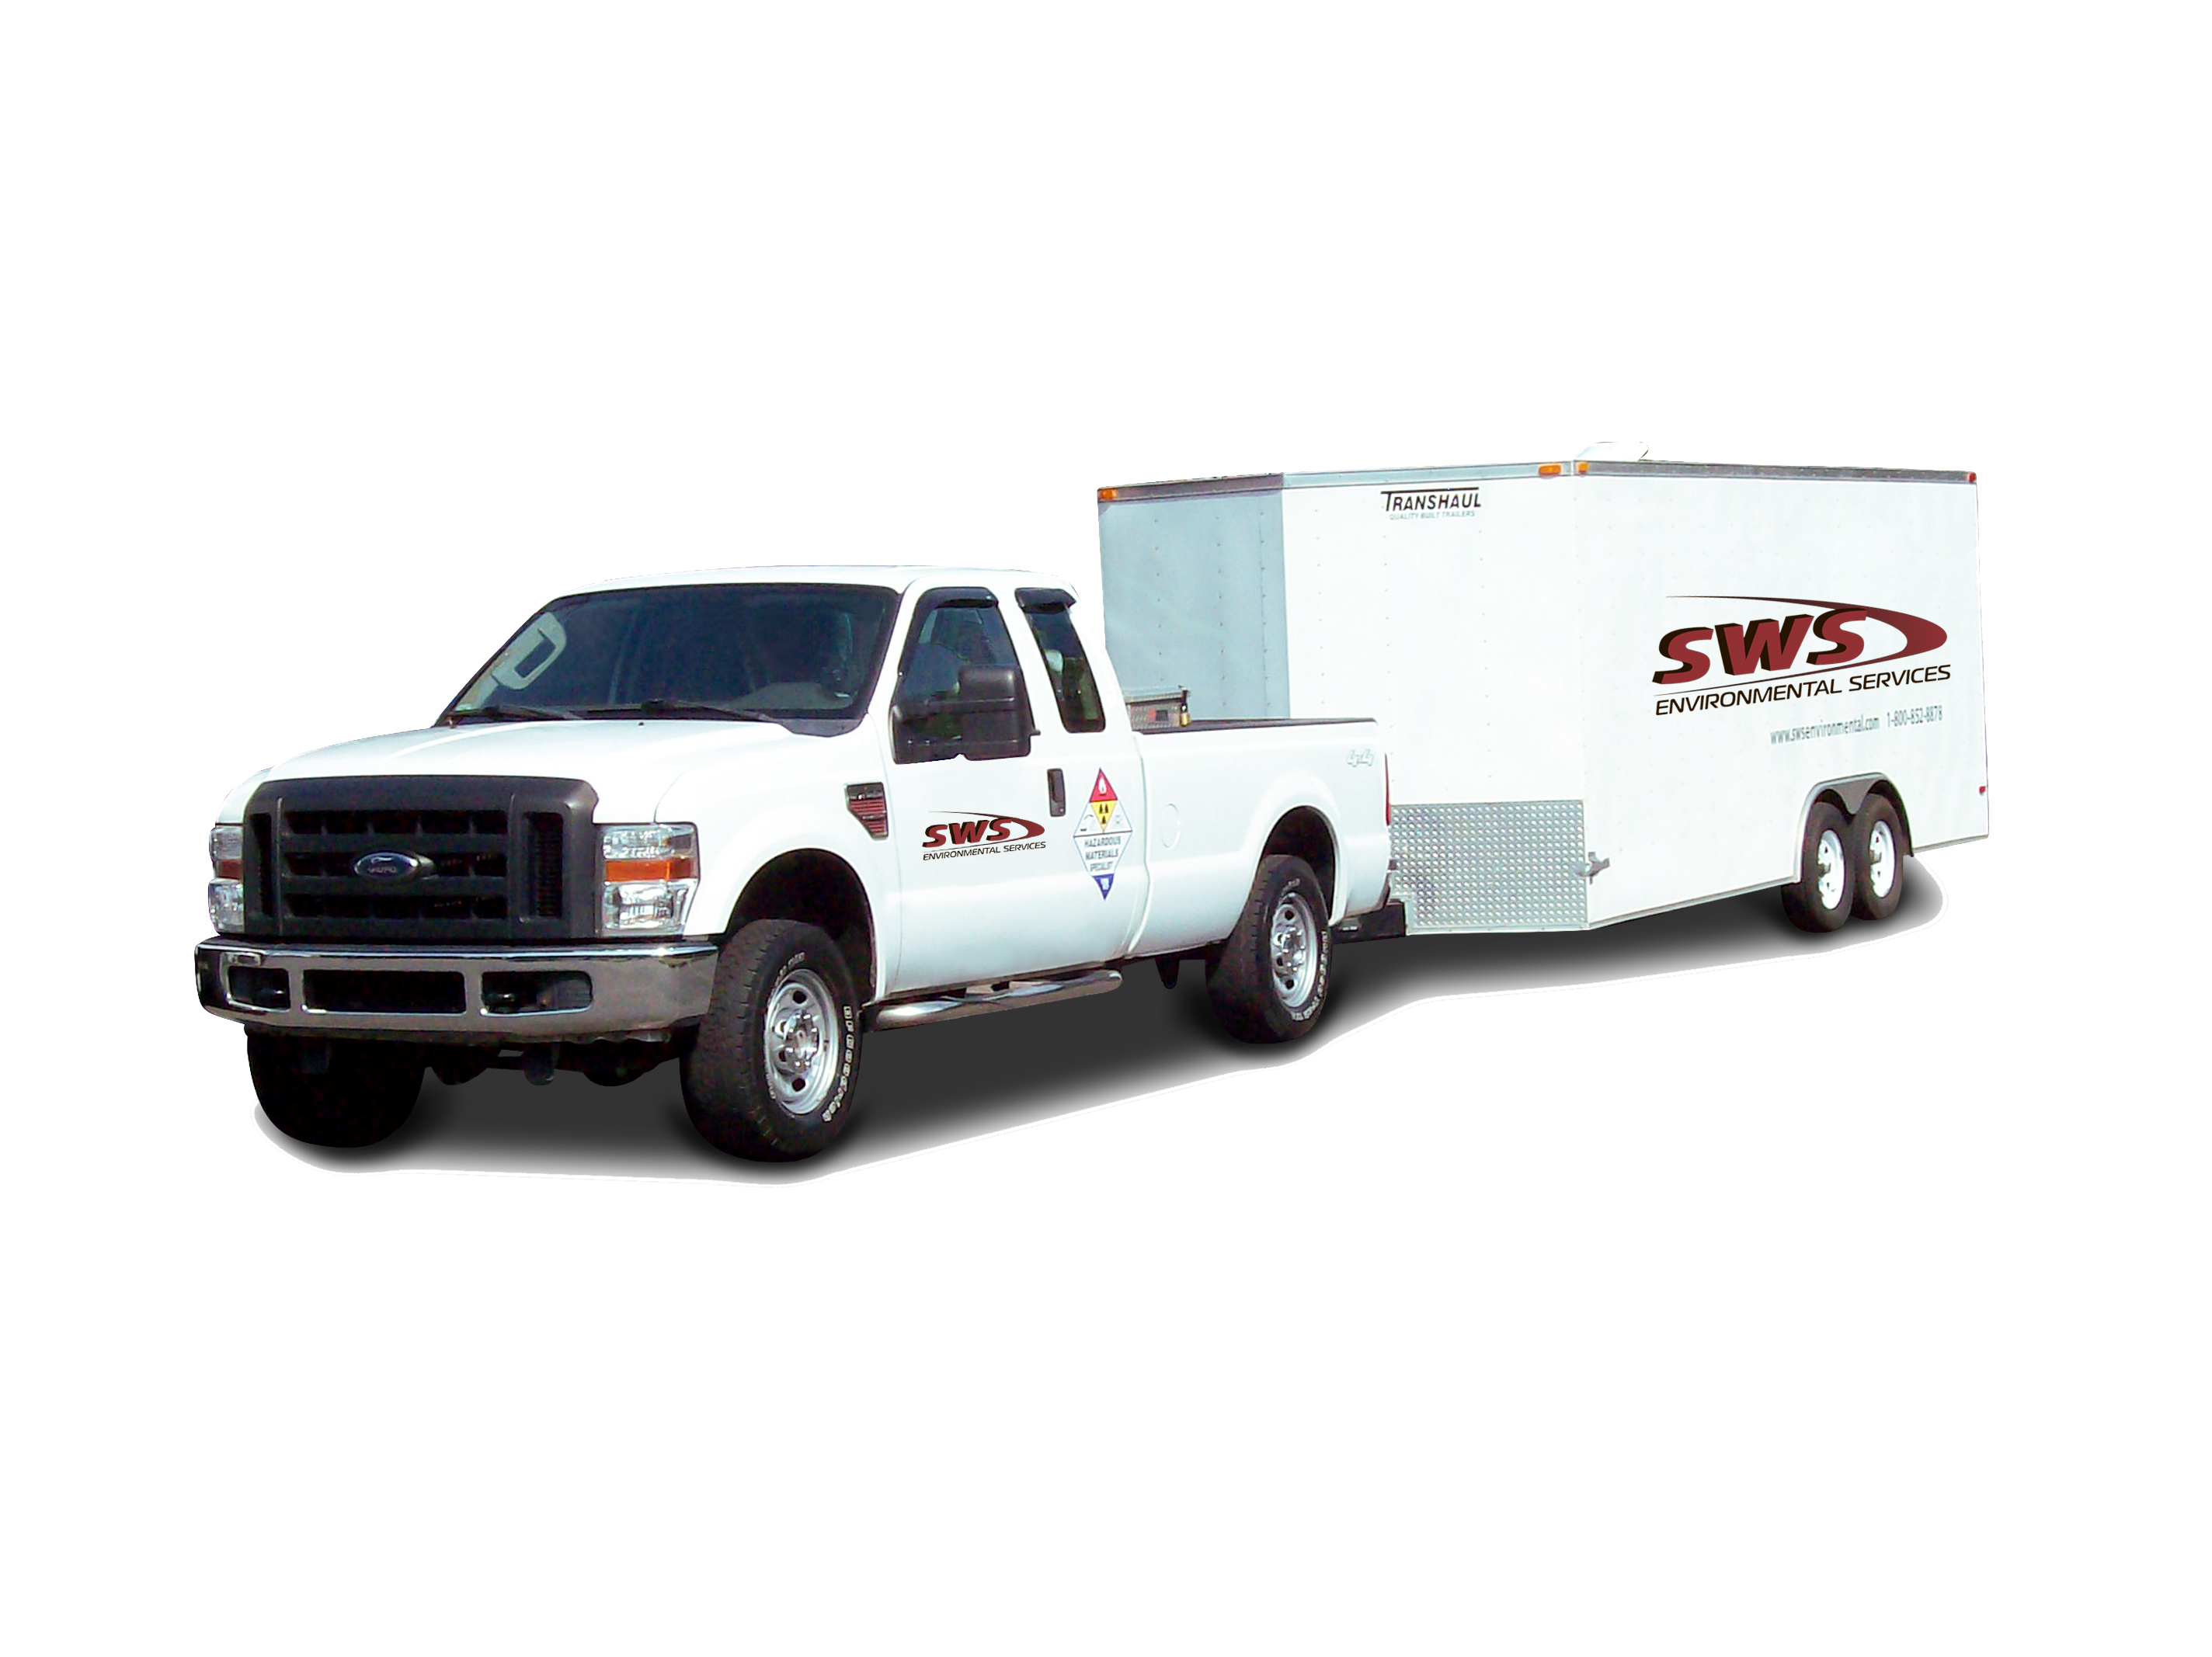 SWS Environmental Services - Serving Jacksonville & Surrounding Areas 4502 Lenox Ave ...